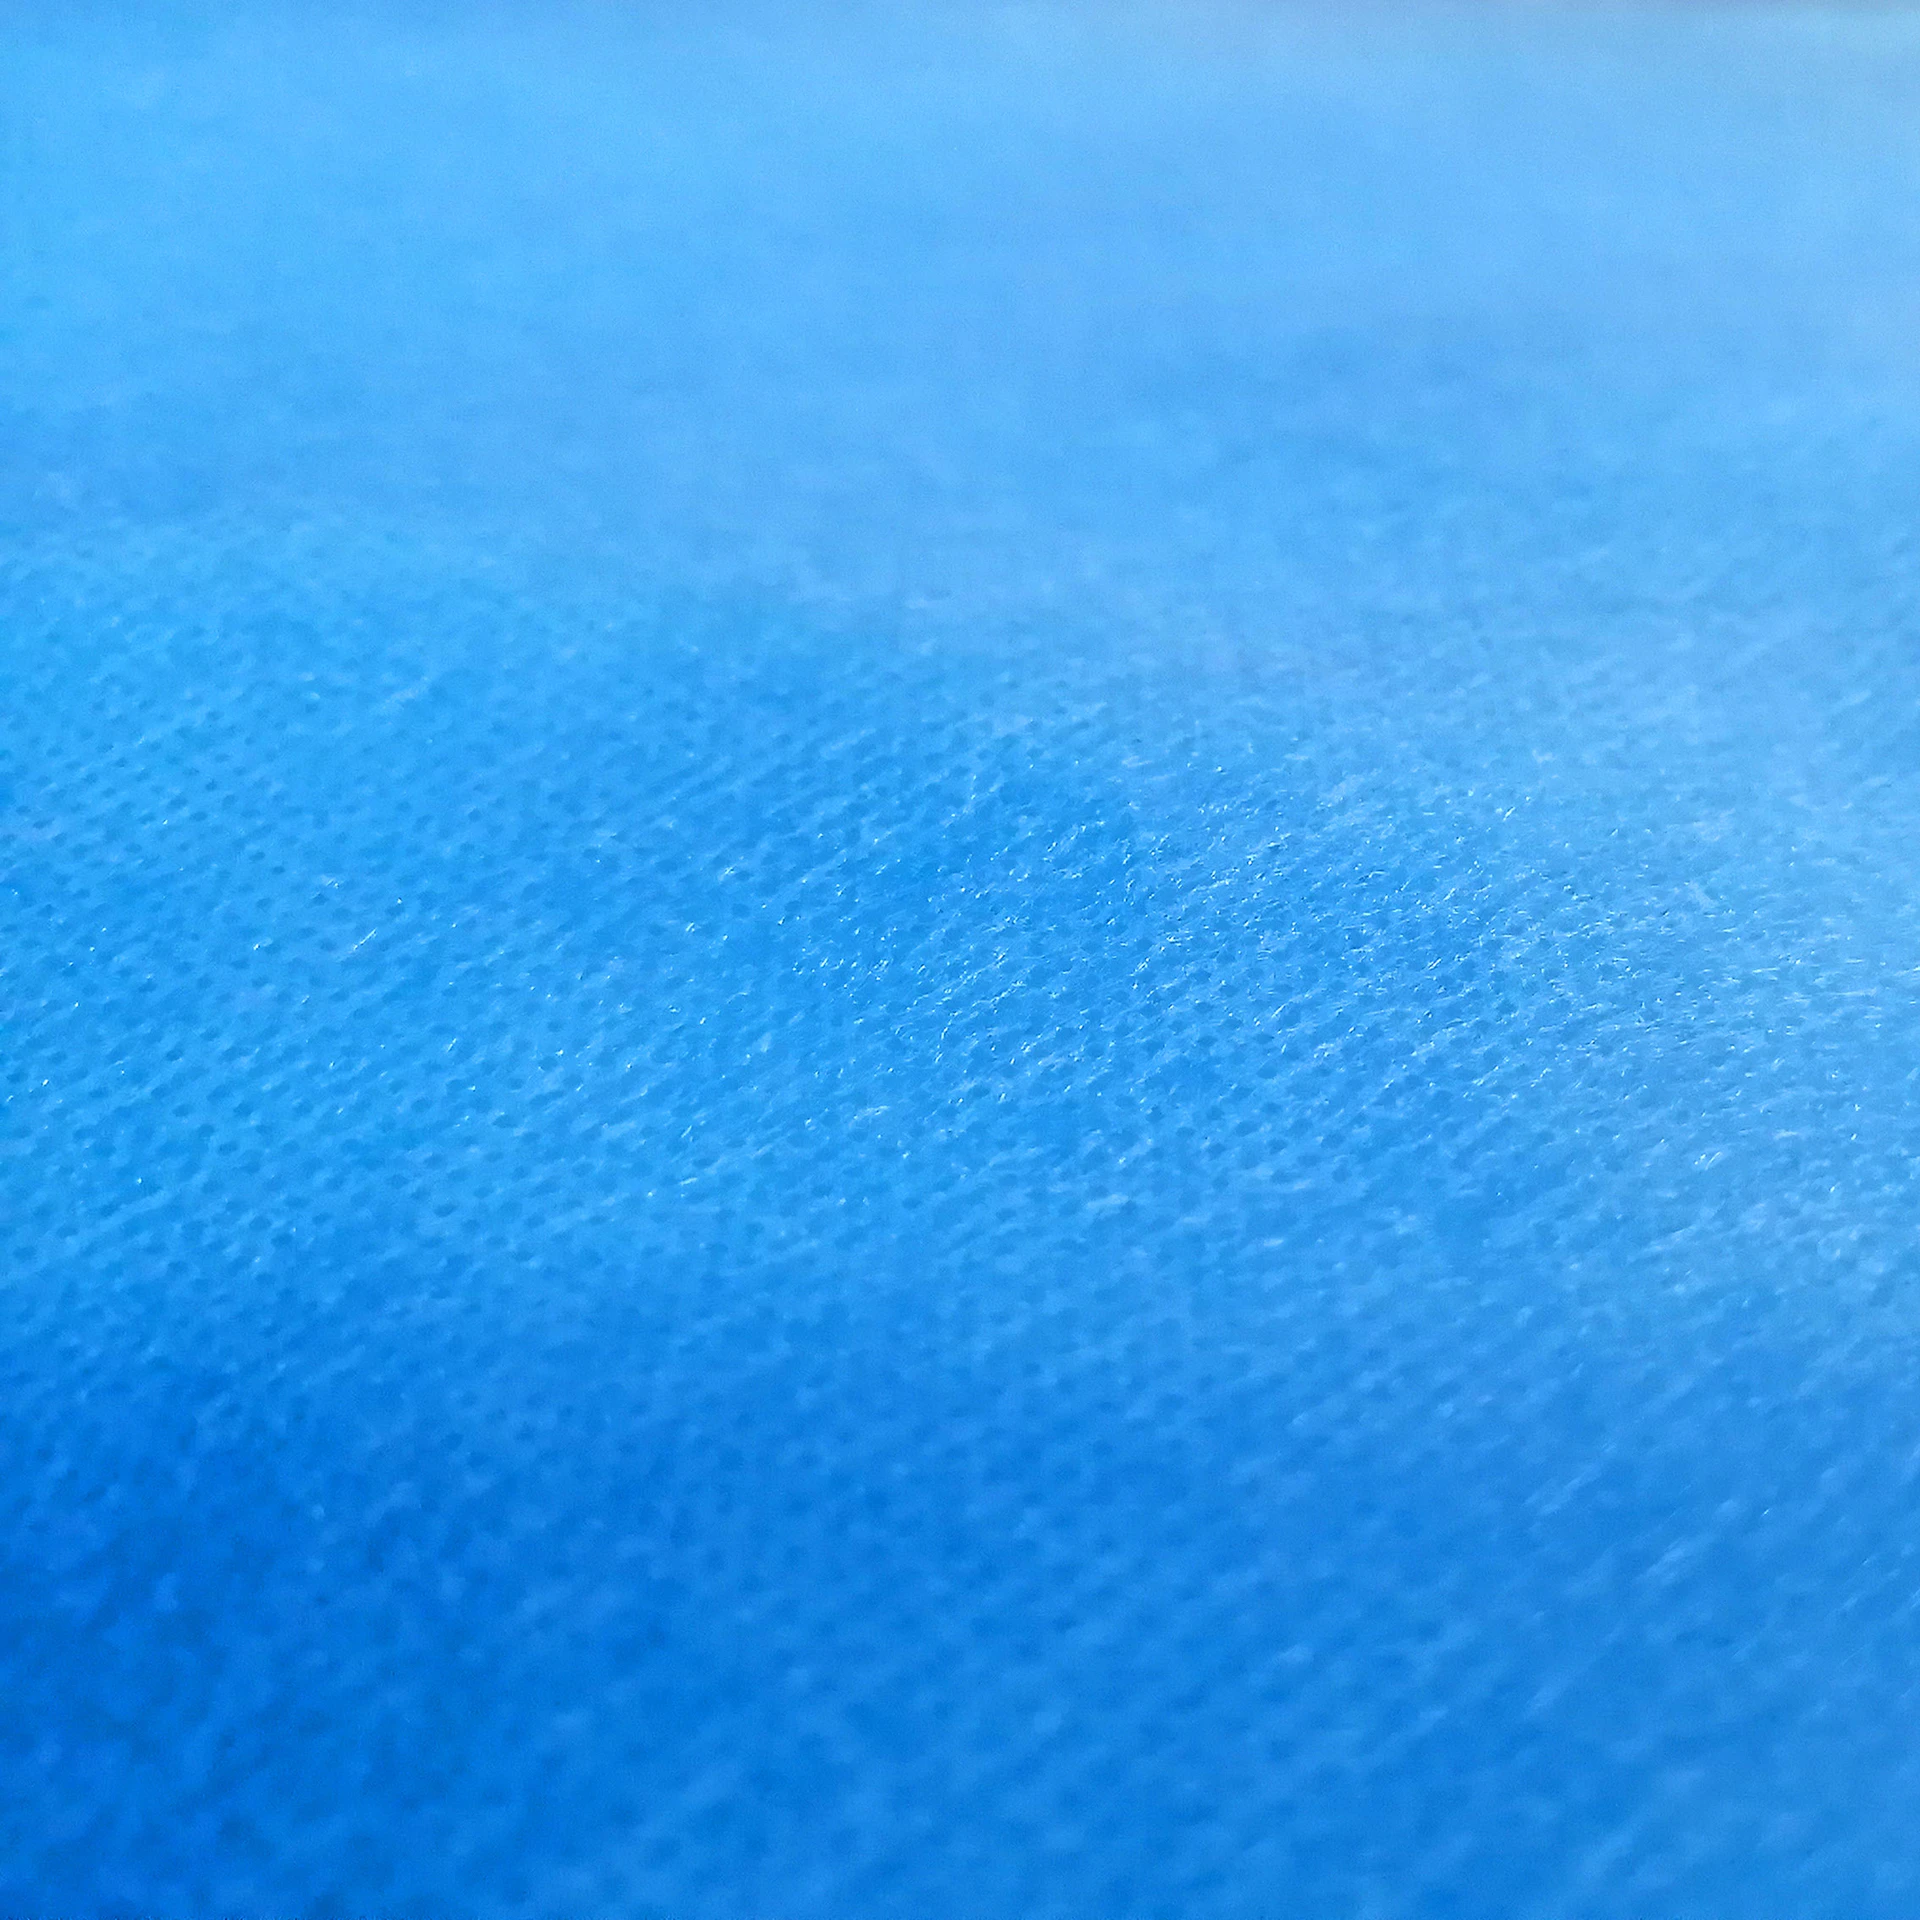 nonwoven manufacturers sms fabric with certificate